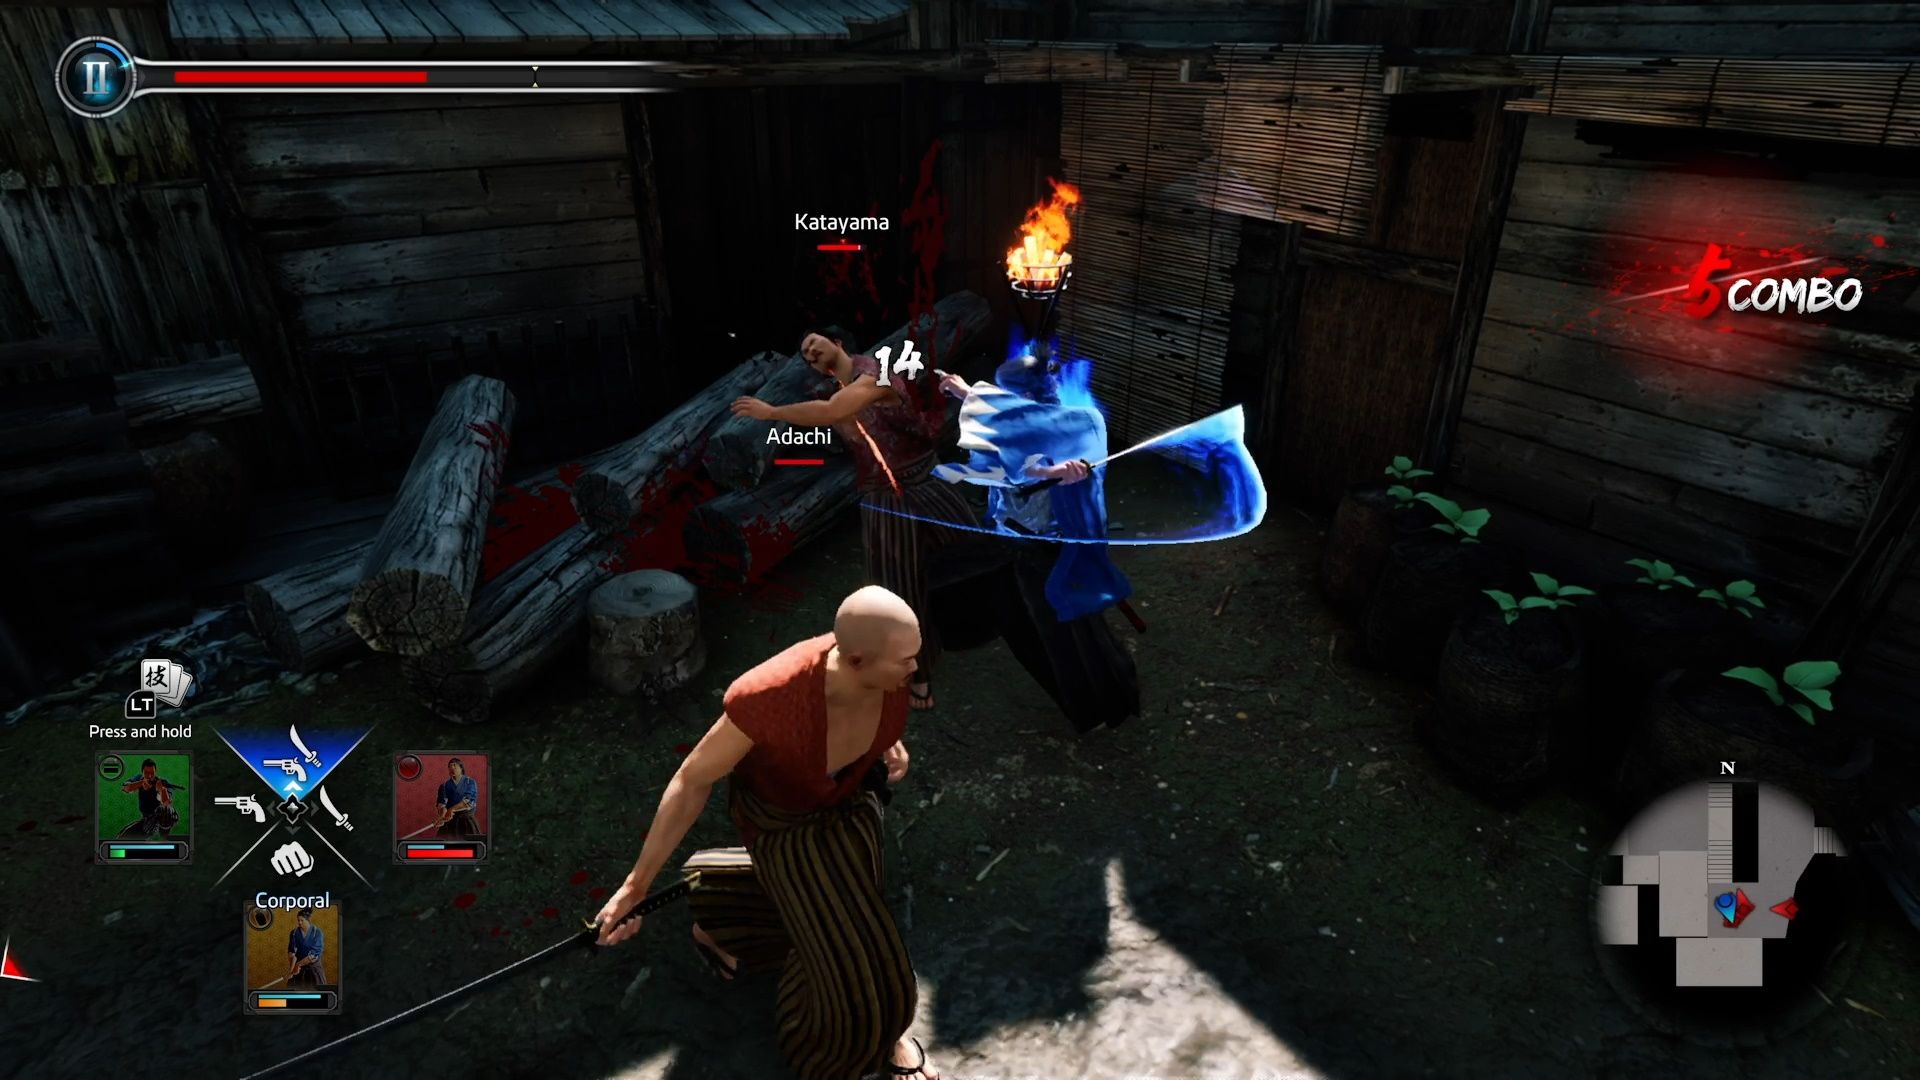 Like A Dragon Ishin, Fighting the kidnappers